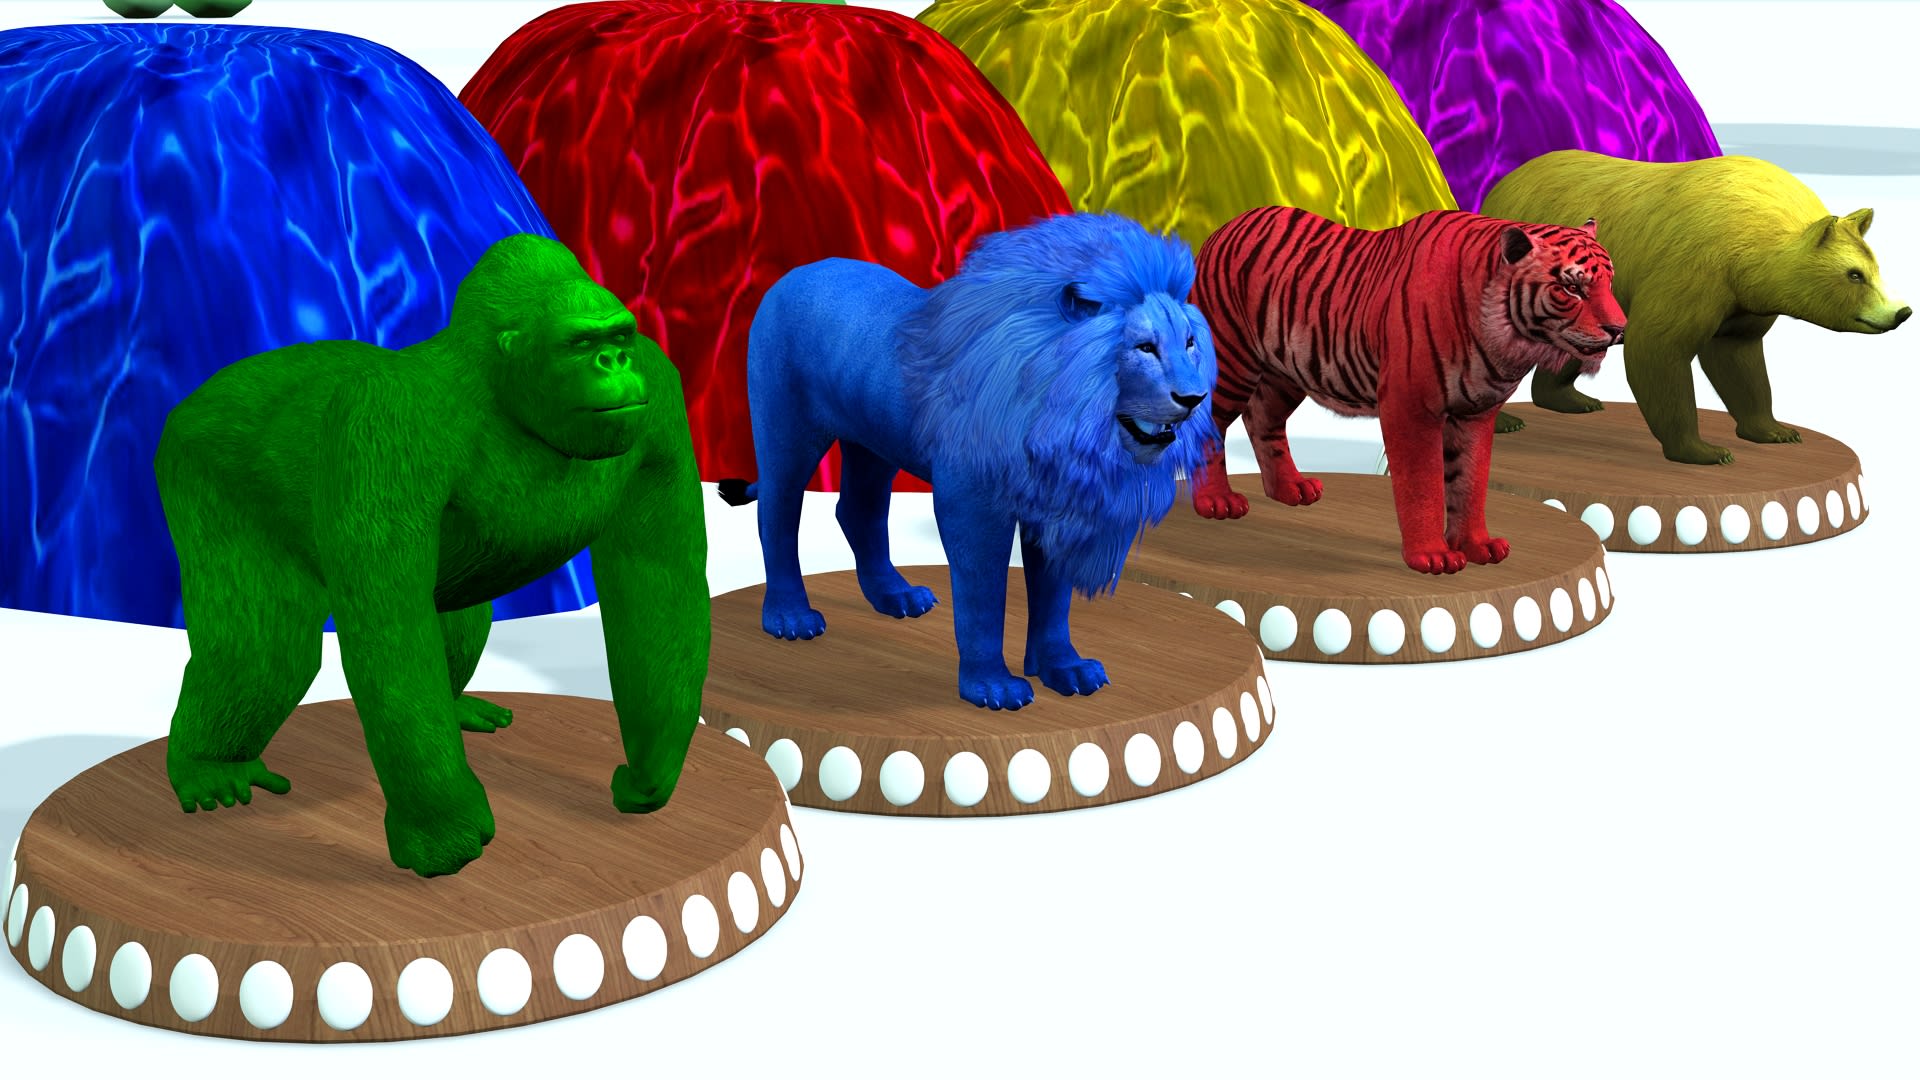 Make 3d animation for kids with animals by Star_kids | Fiverr